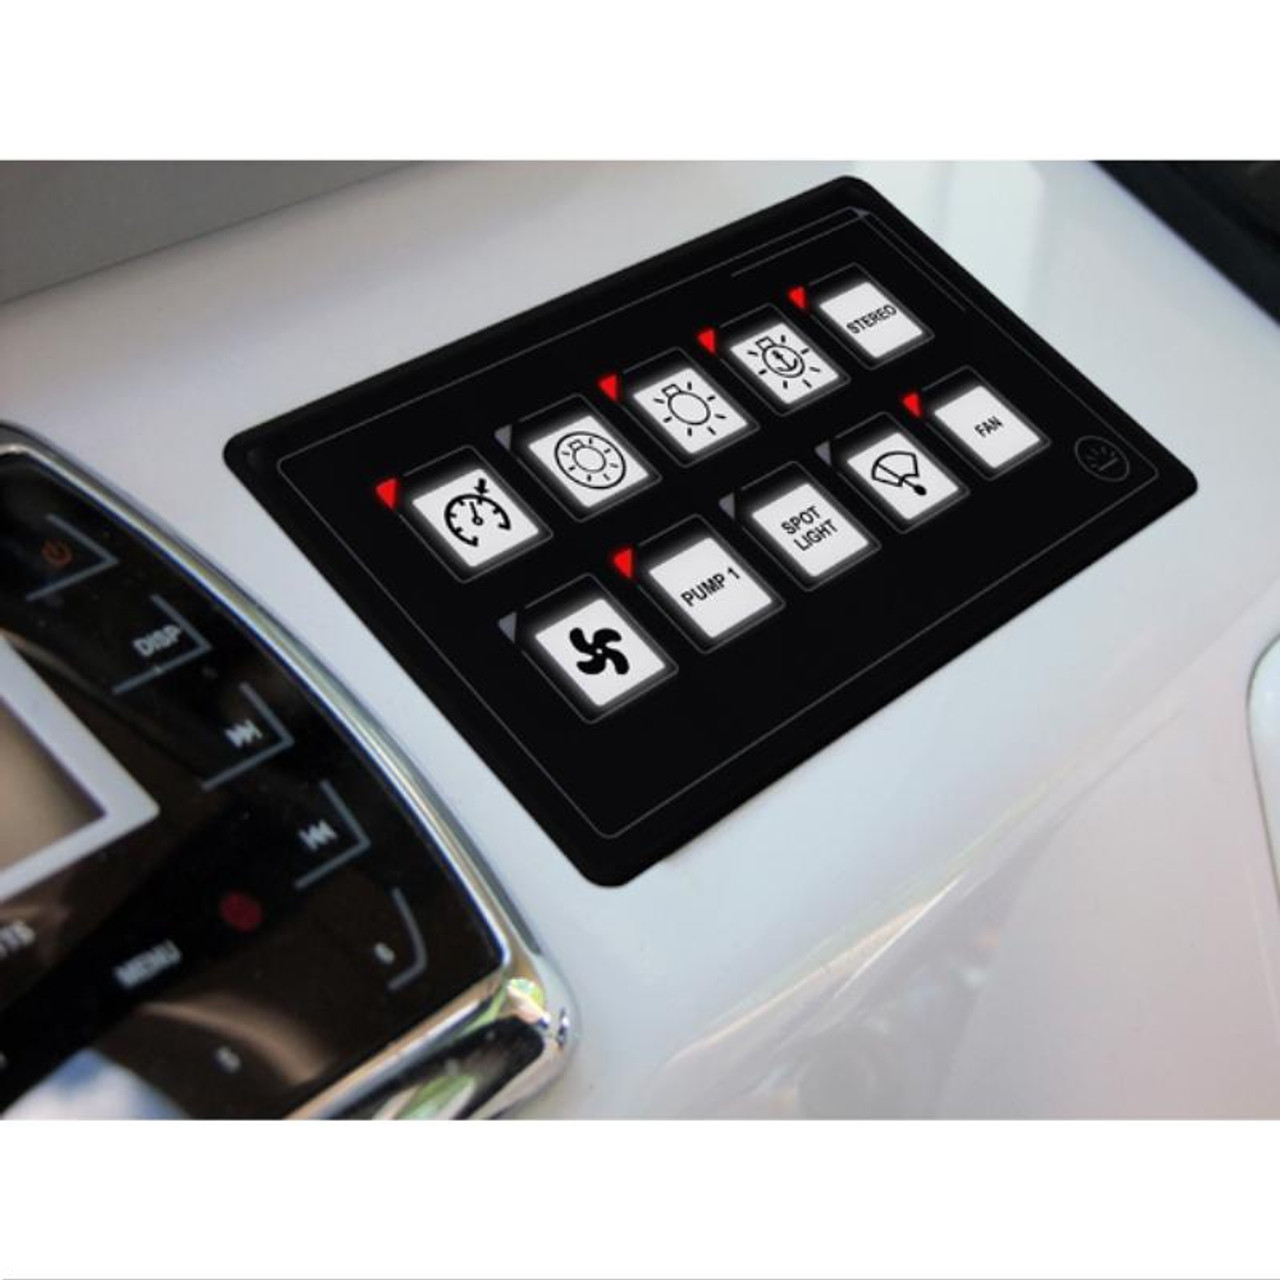 Panel Switch,12-24V Car Universal 6P LED Touch Membrane Control Panel Switch Electronic Accessory On Off Rocker Toggle Switch Panel Box - 3